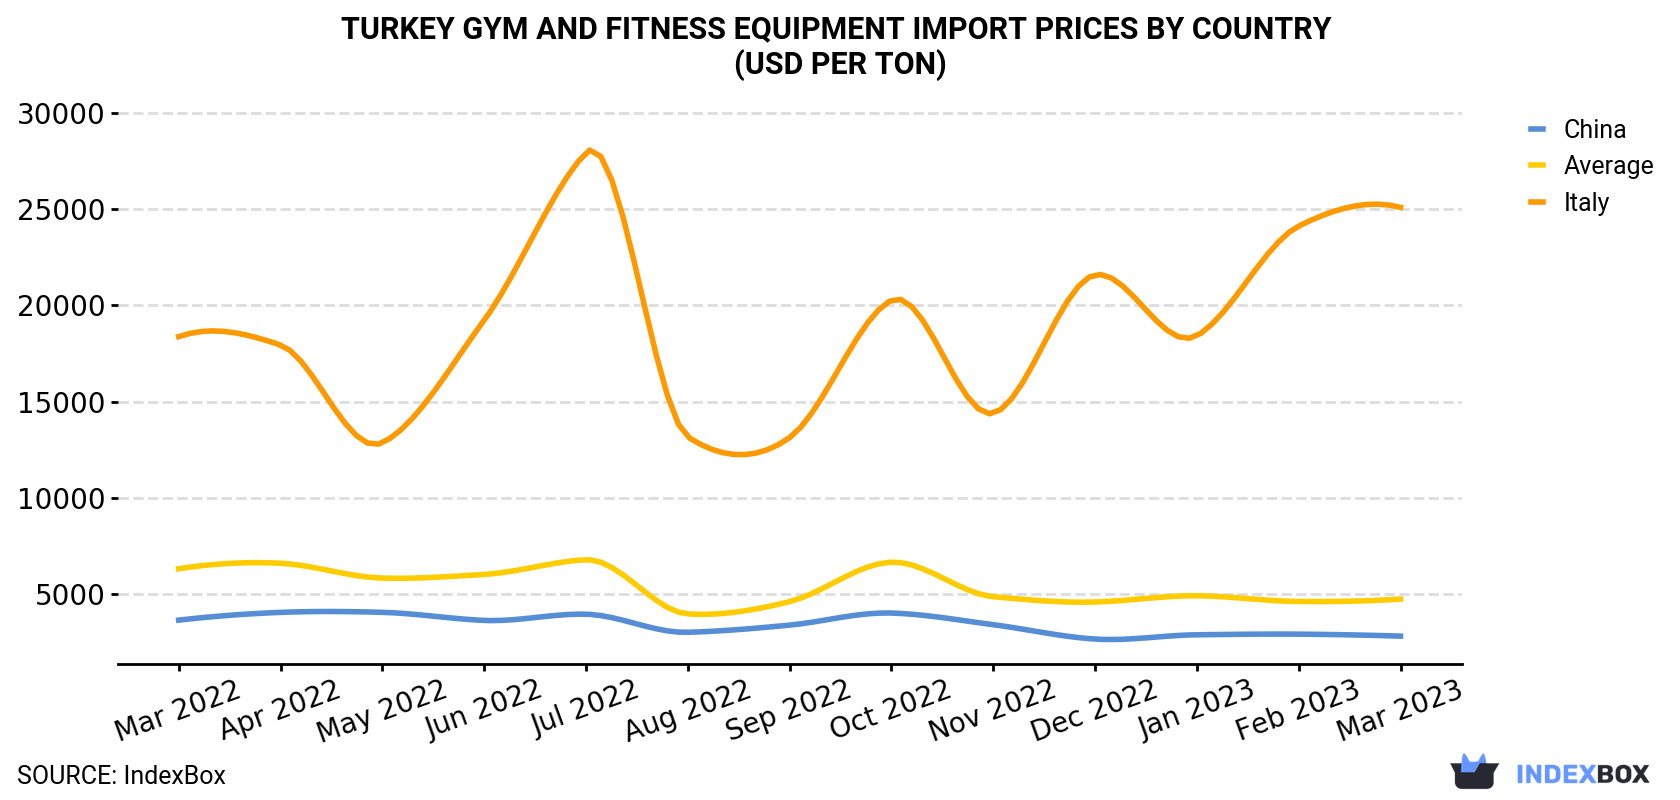 Turkey Gym and Fitness Equipment Import Prices By Country (USD Per Ton)